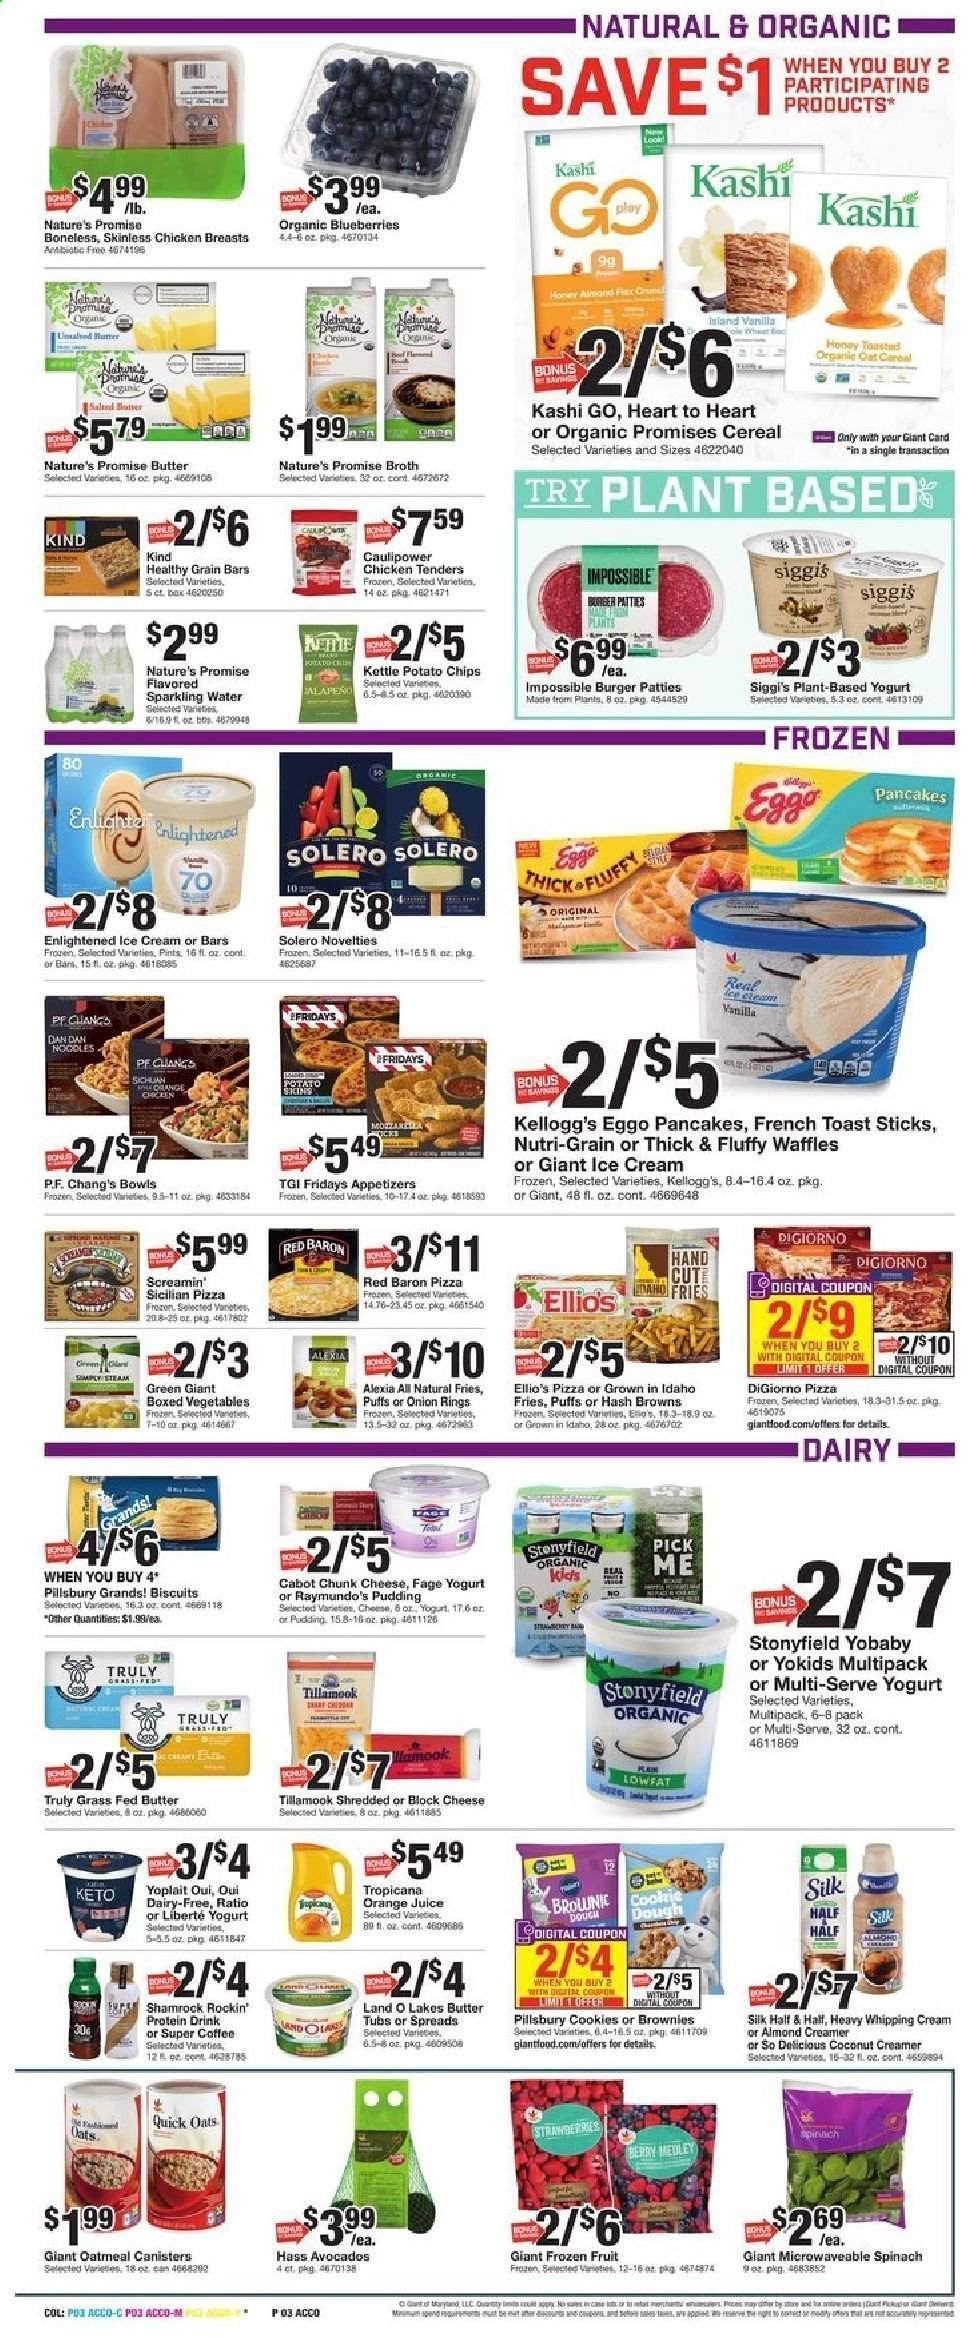 thumbnail - Giant Food Flyer - 01/15/2021 - 01/21/2021 - Sales products - blueberries, toast bread, Nature’s Promise, puffs, brownies, pancakes, waffles, coconut, hash browns, pizza, onion rings, hamburger, Pillsbury, cheese, chunk cheese, pudding, yoghurt, Yoplait, protein drink, Silk, butter, creamer, almond creamer, whipping cream, ice cream, Solero, Enlightened lce Cream, spinach, strawberries, potato fries, Red Baron, cookies, Kellogg's, biscuit, potato chips, oatmeal, oats, broth, cereals, Quick Oats, honey, almonds, orange juice, juice, sparkling water, tea, coffee, TRULY, chicken breasts, chicken tenders, burger patties, avocado. Page 3.